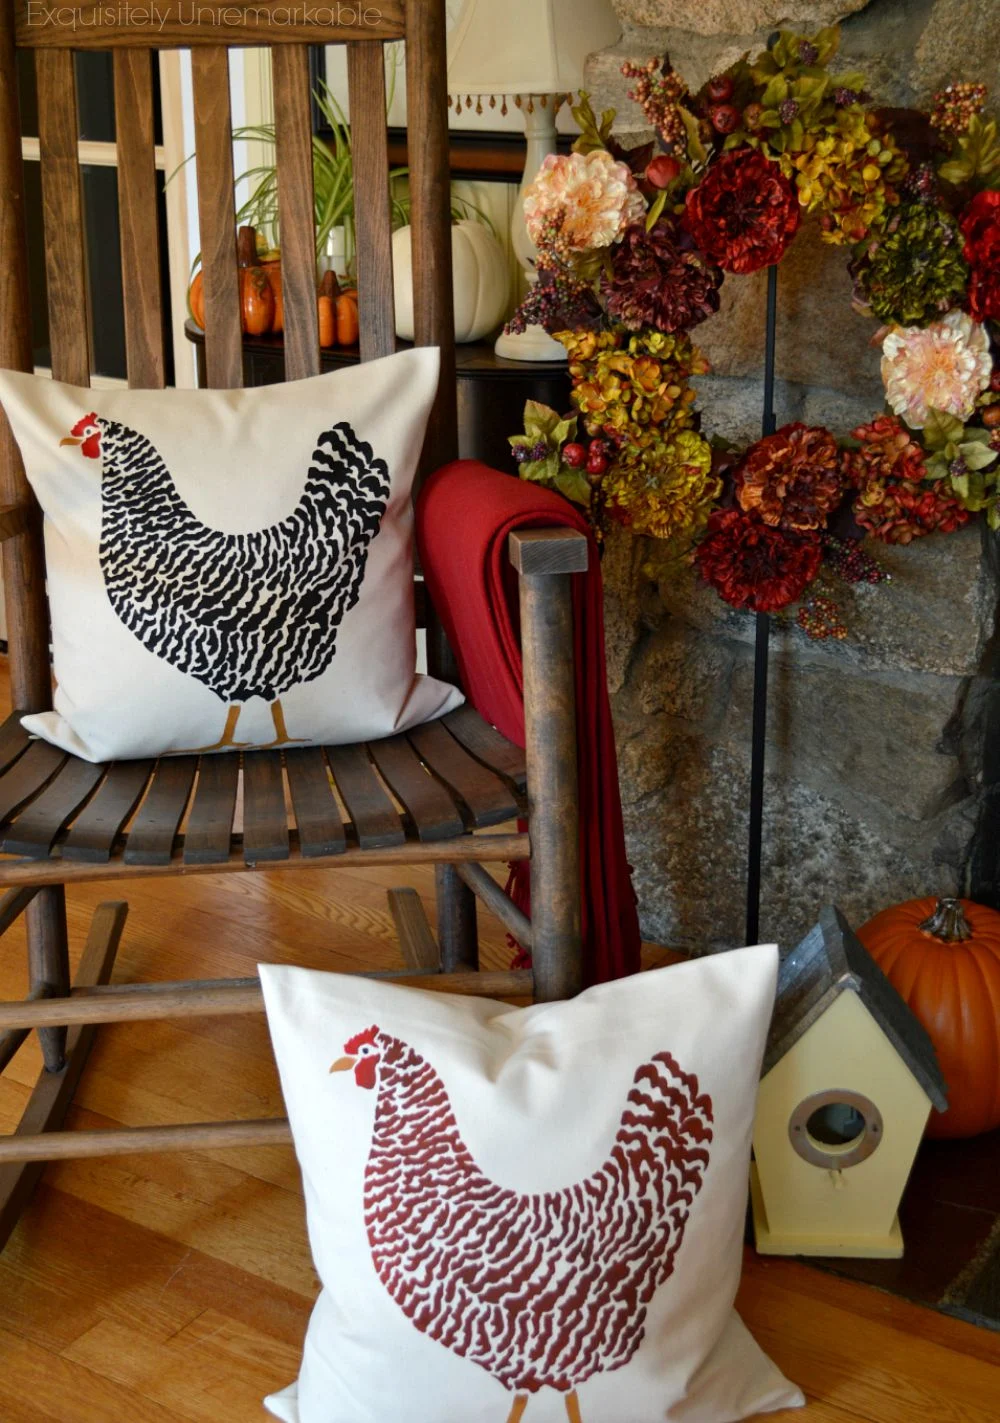 Rooster pillows in the living room